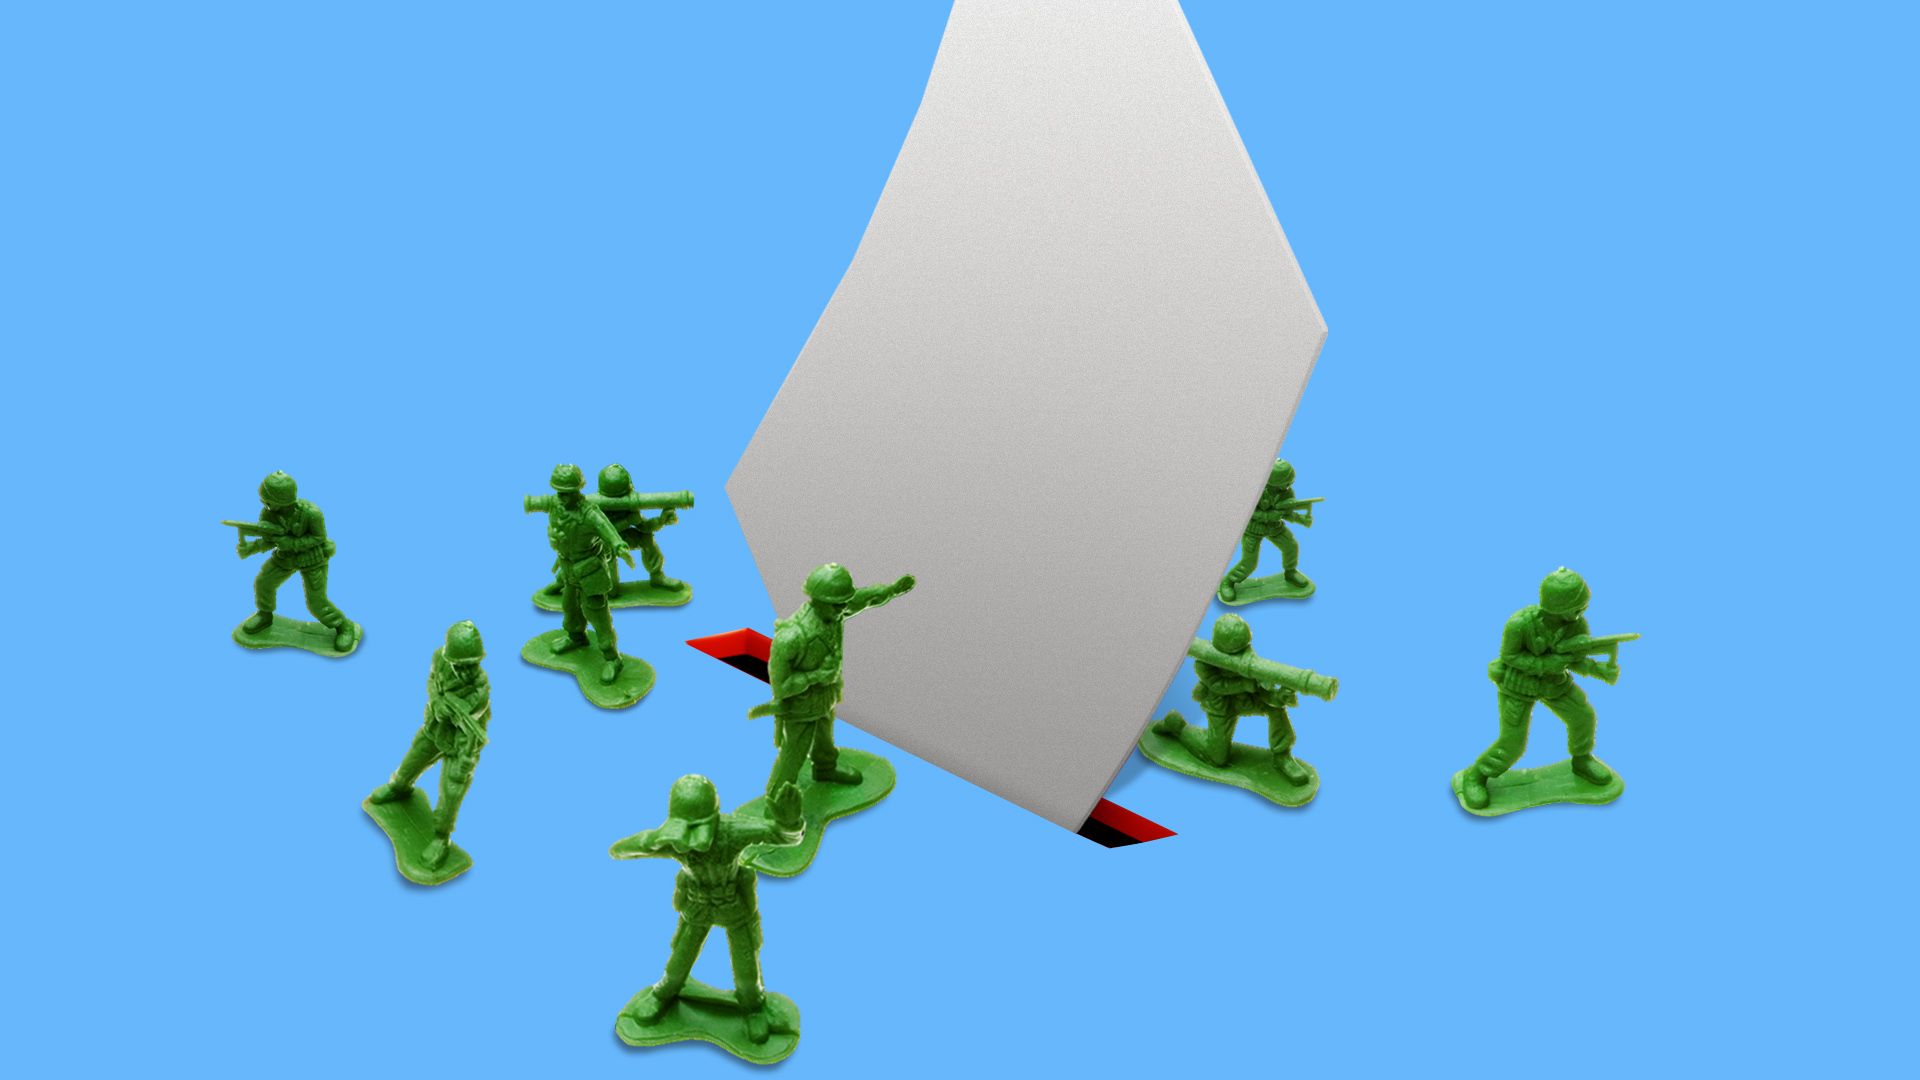 Illustration of green army figurines surrounding a paper ballot going into a red election slot over a blue background.